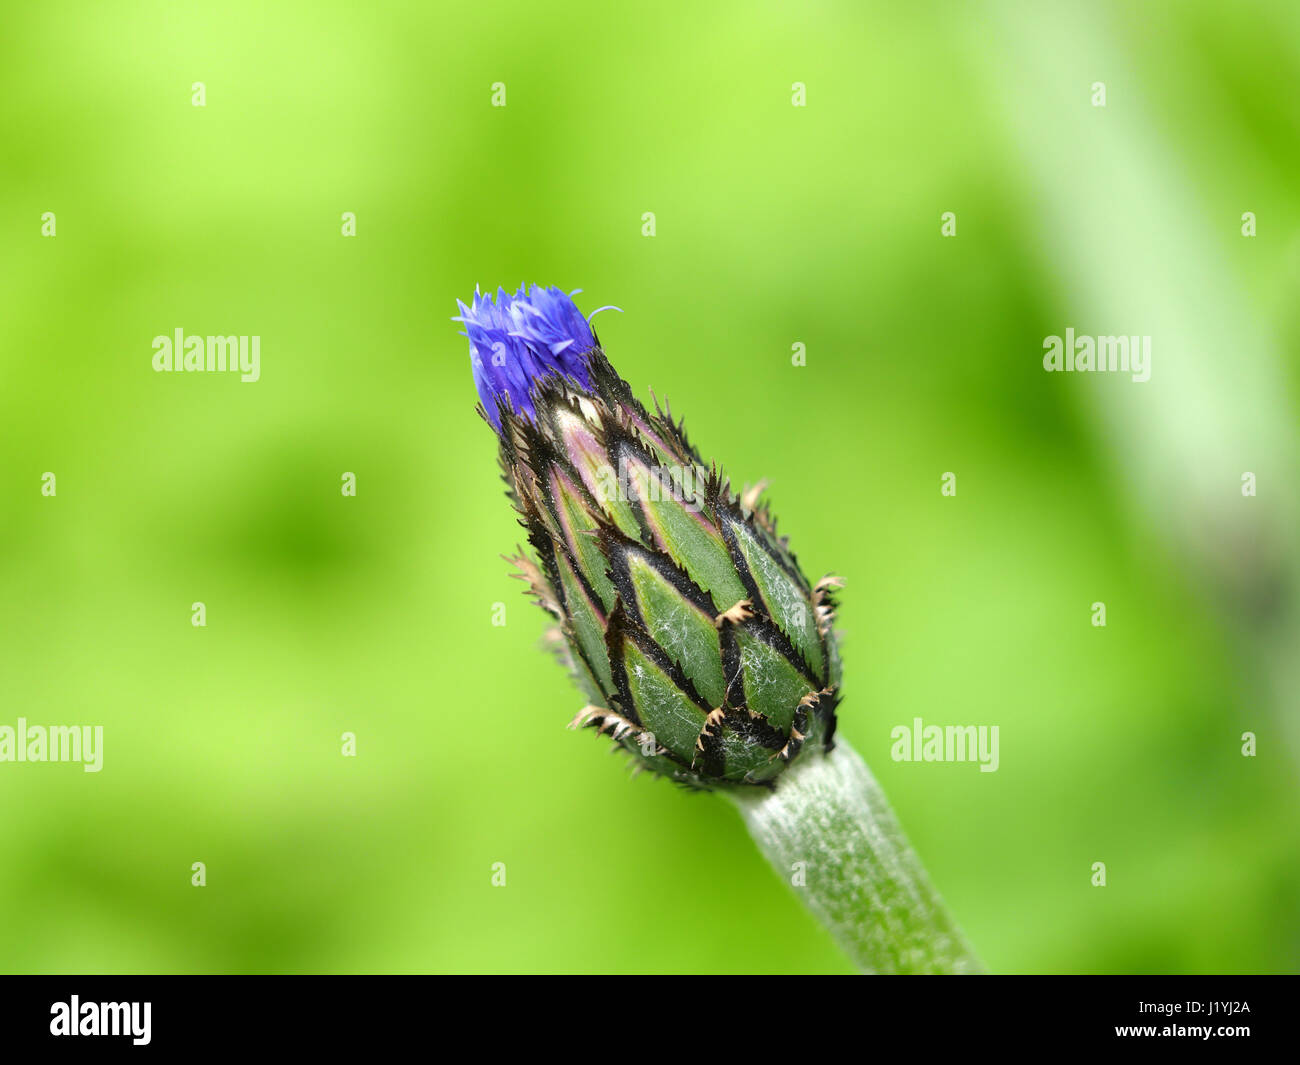 Corn flower at the point of opening Stock Photo